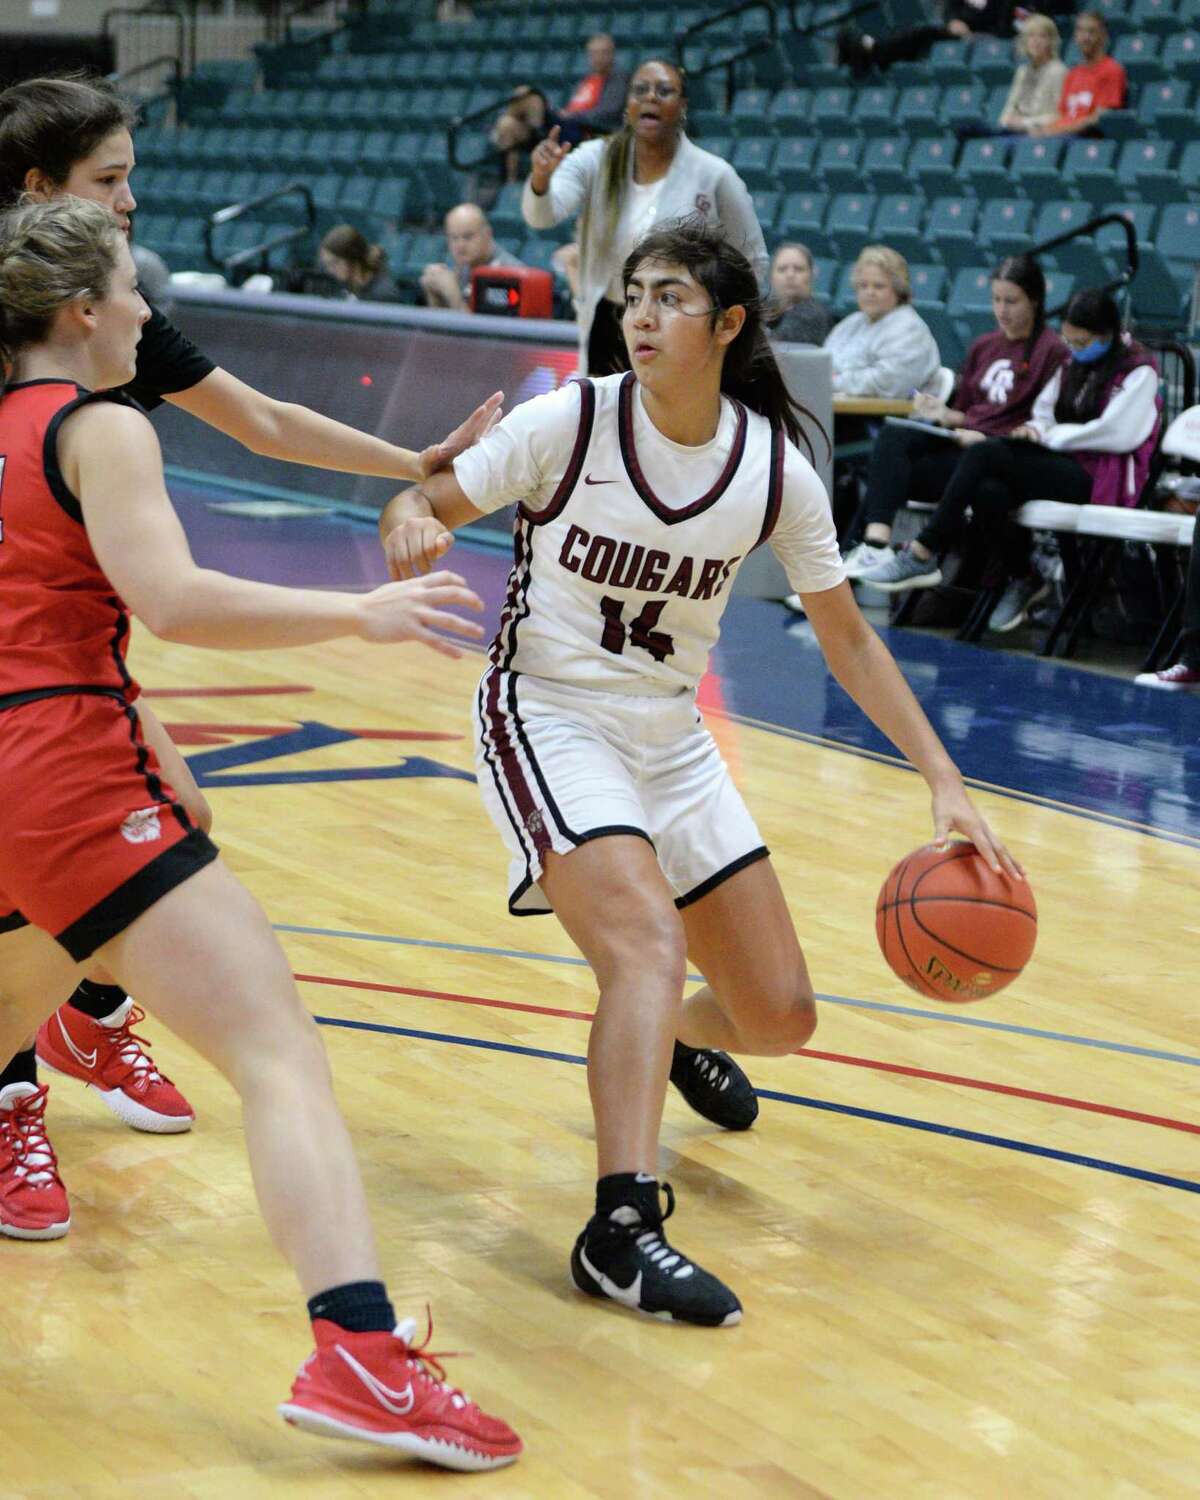 Madison Mascorro (14) of Cinco Ranch drives toward the basket during the second half of the third place game between the Cinco Ranch Cougars and the Katy Tigers in the Katy ISD Basketball Classic on Saturday, December 5, 2021 at the Leonard Merrill Center, Katy, TX.